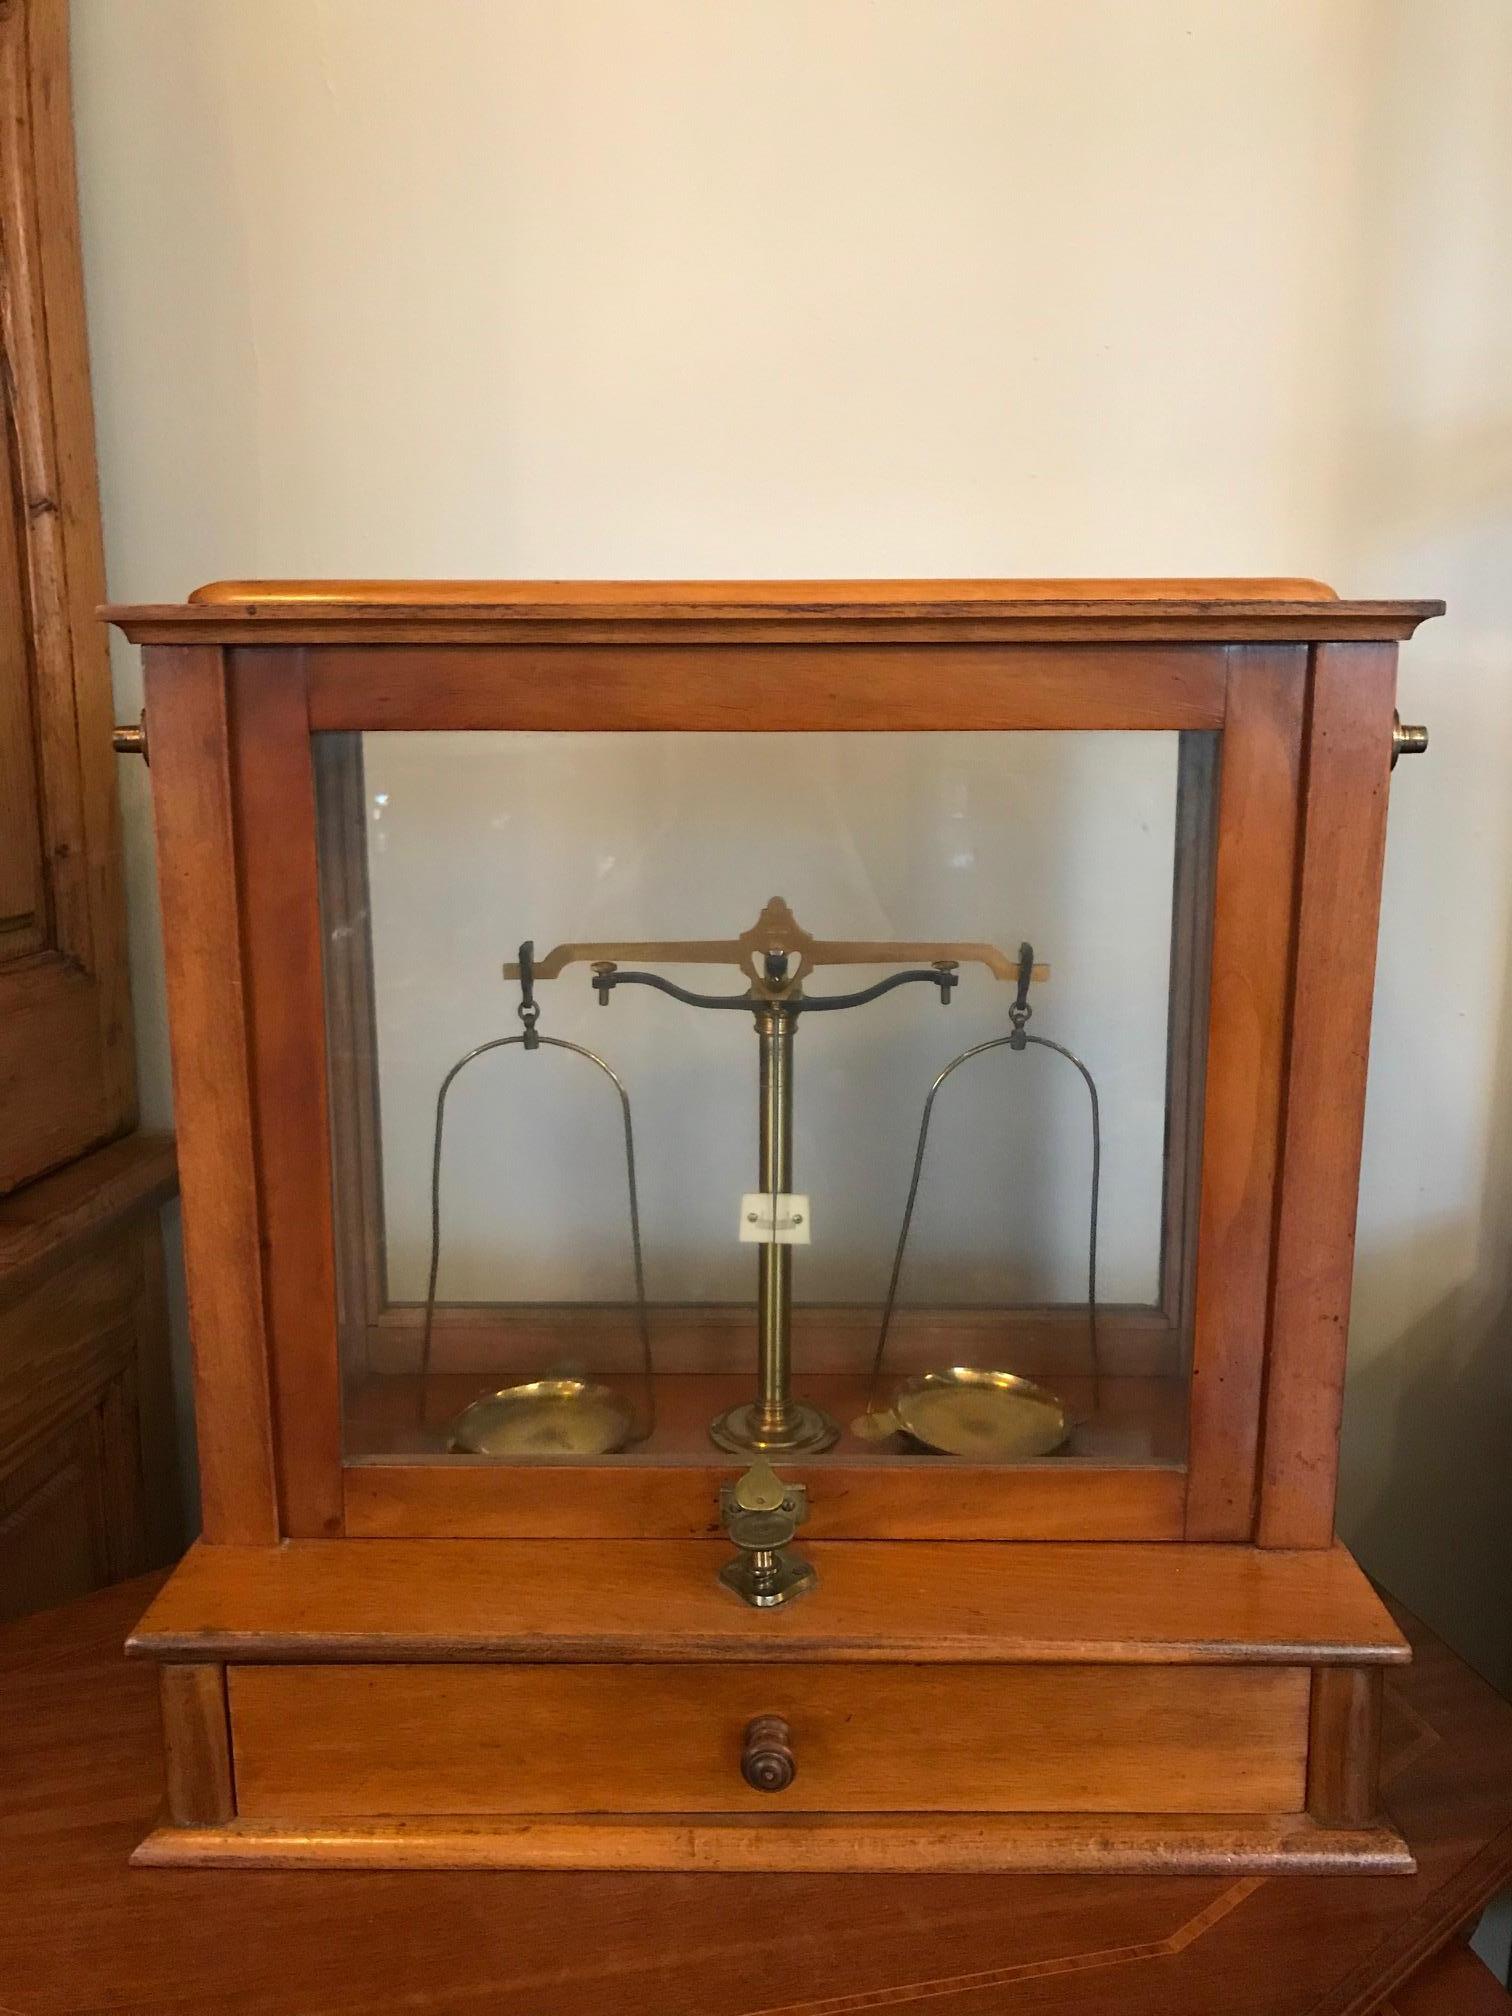 Beautiful 20th century French wood and gilded brass Jeweler scale from the 1950s with its brass weight. Scale under a glass that is sliding up and down.
Manufacturer brass stamp. Nice and rare piece. You will find jewelry drawings.